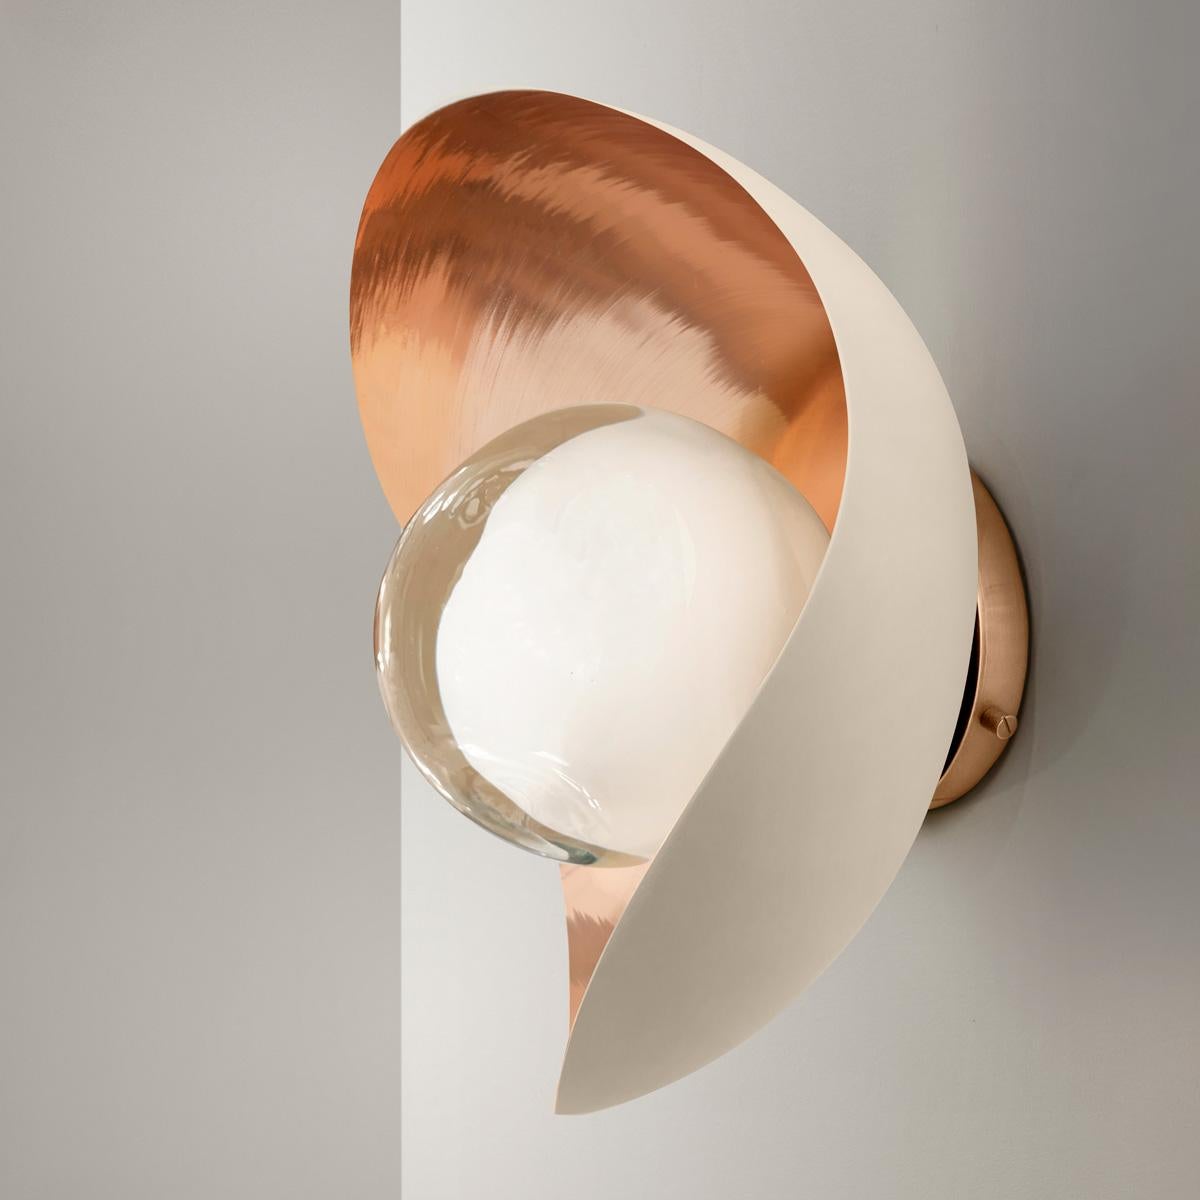 Perla Wall Light by Gaspare Asaro-Satin Brass/Polished Nickel Finish For Sale 4